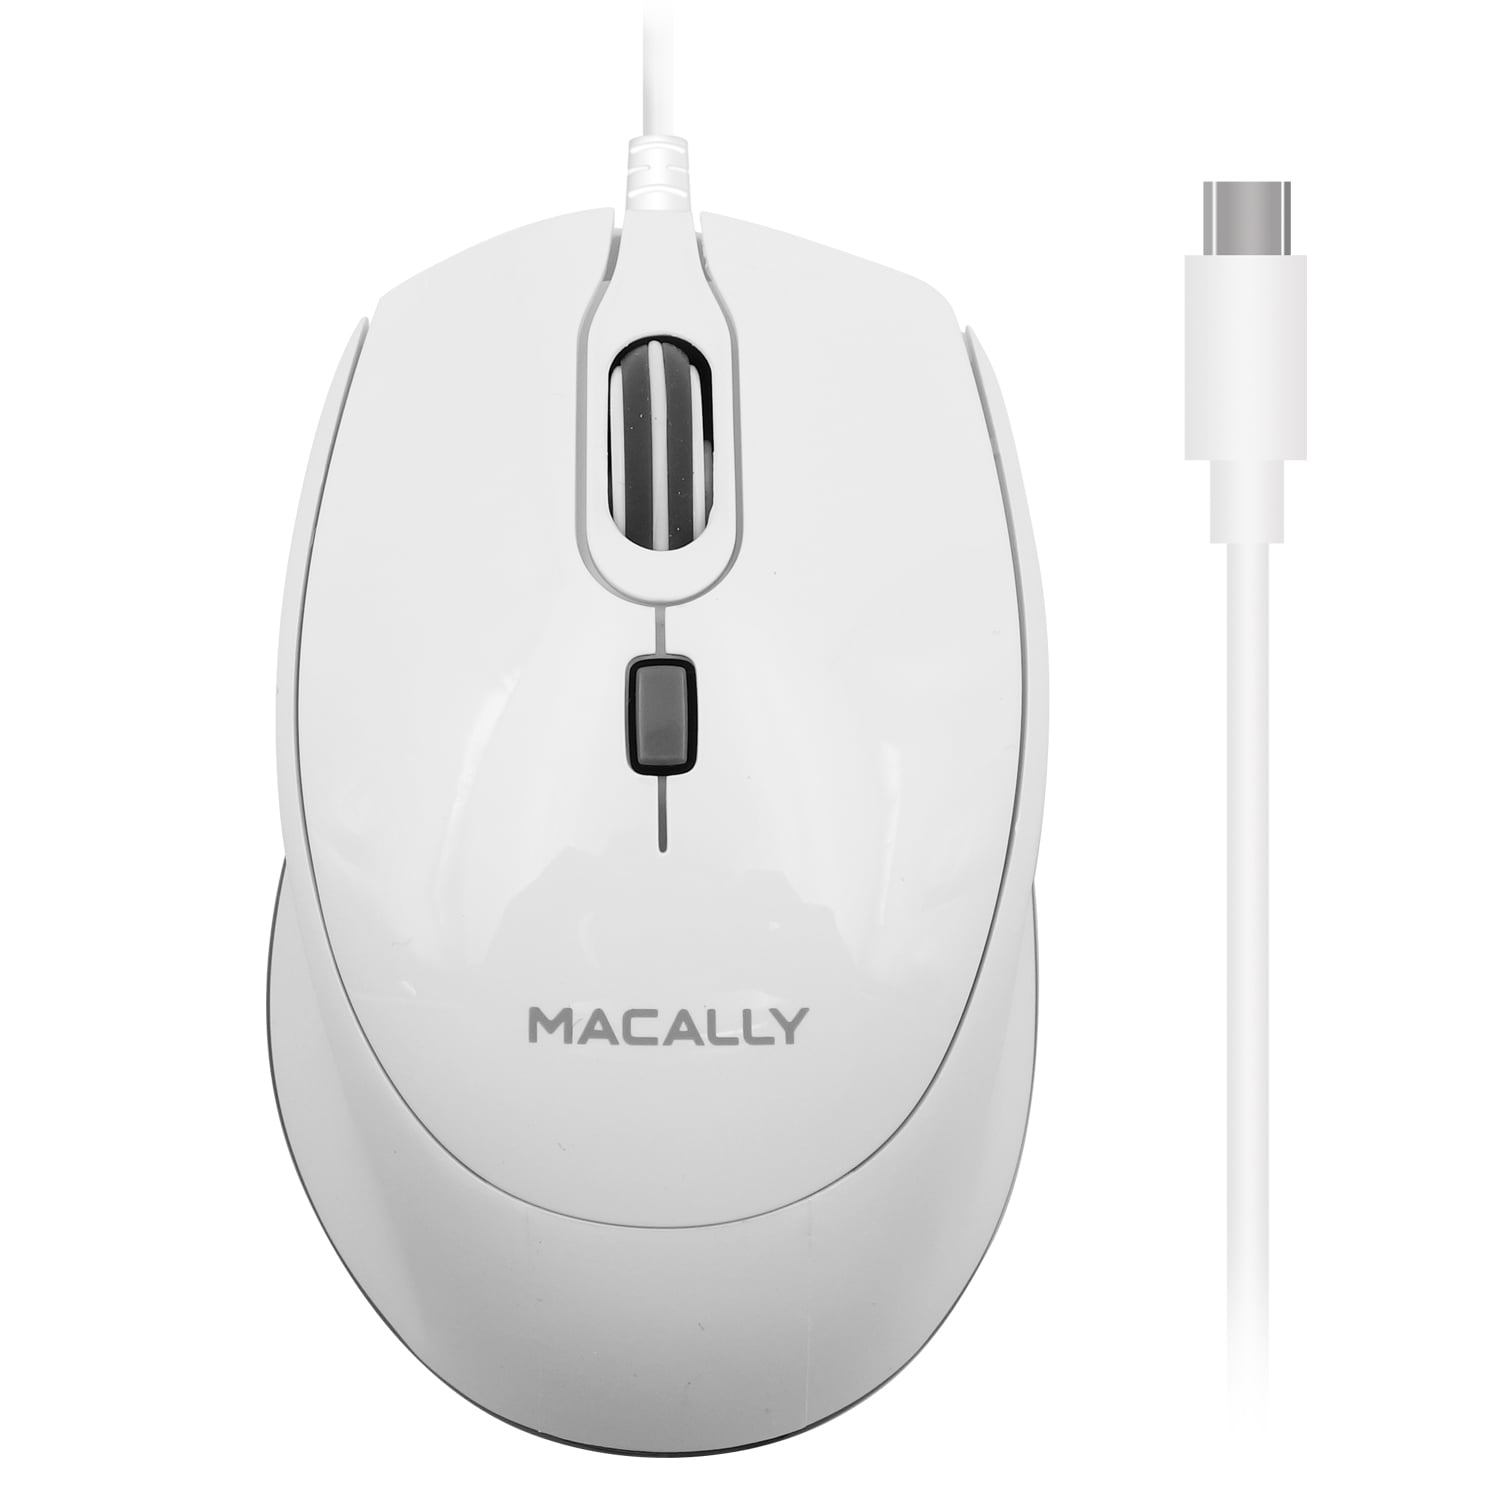 Spelling Omgeving Een hekel hebben aan Macally Macally USB C Mouse for Mac - Precise and Comfortable - Wired Type  C Mouse for Macbook Pro Air|PC|iOS|Android - Ambidextrous Body, Multiple  DPI Modes, and 5ft Cable - Plug and